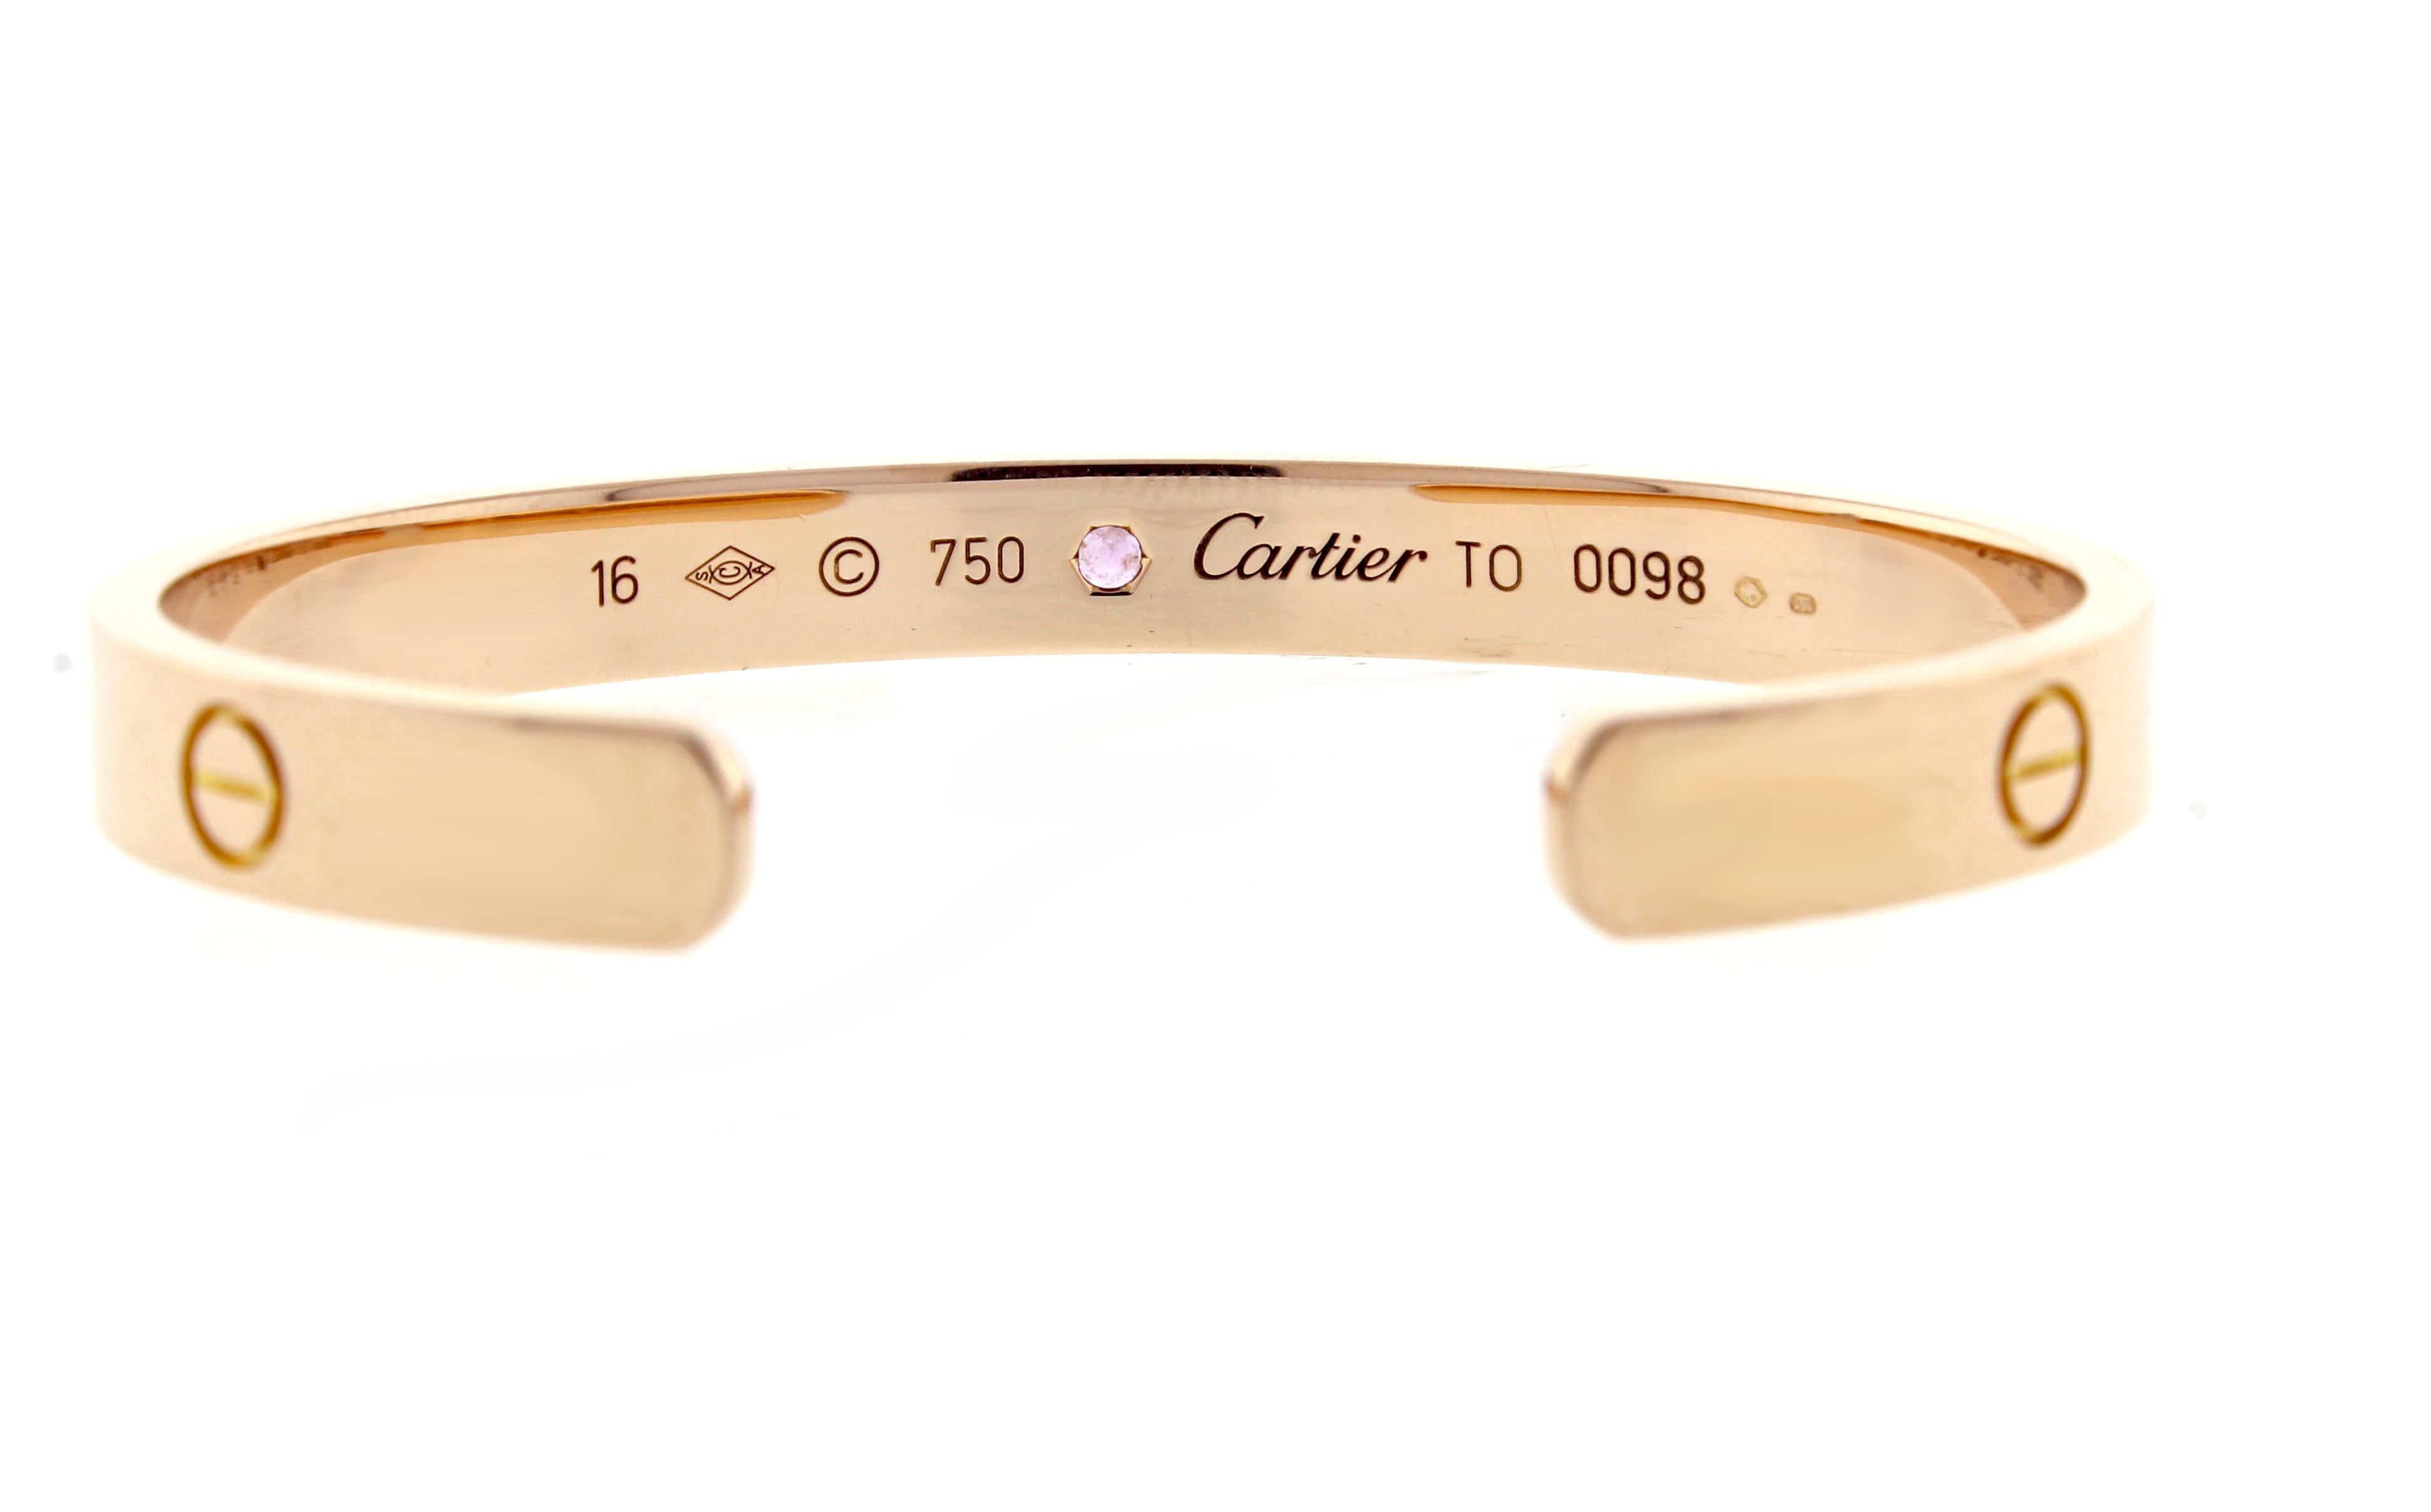 18 karat pink gold Cartier Love cuff bracelet set with a single pink sapphire. The love bracelet remains an iconic symbol of love that transcends convention. Size 16, as new in original box